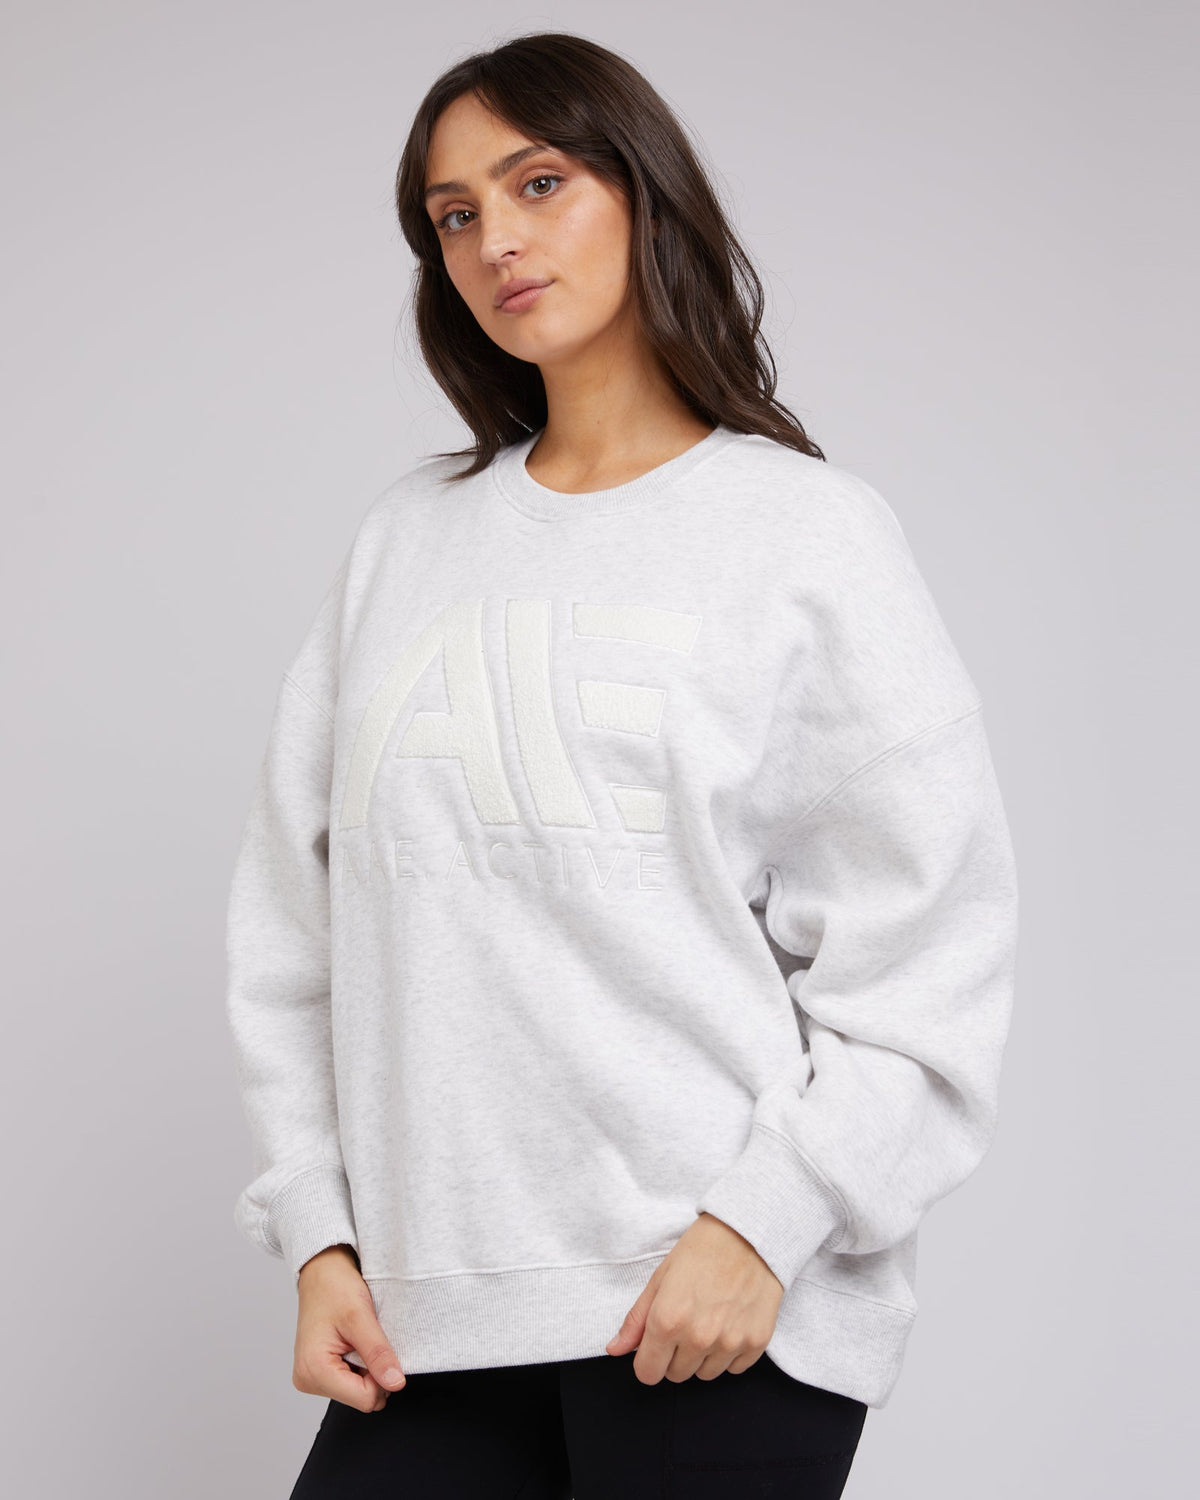 All About Eve-Base Active Crew Snow-Edge Clothing